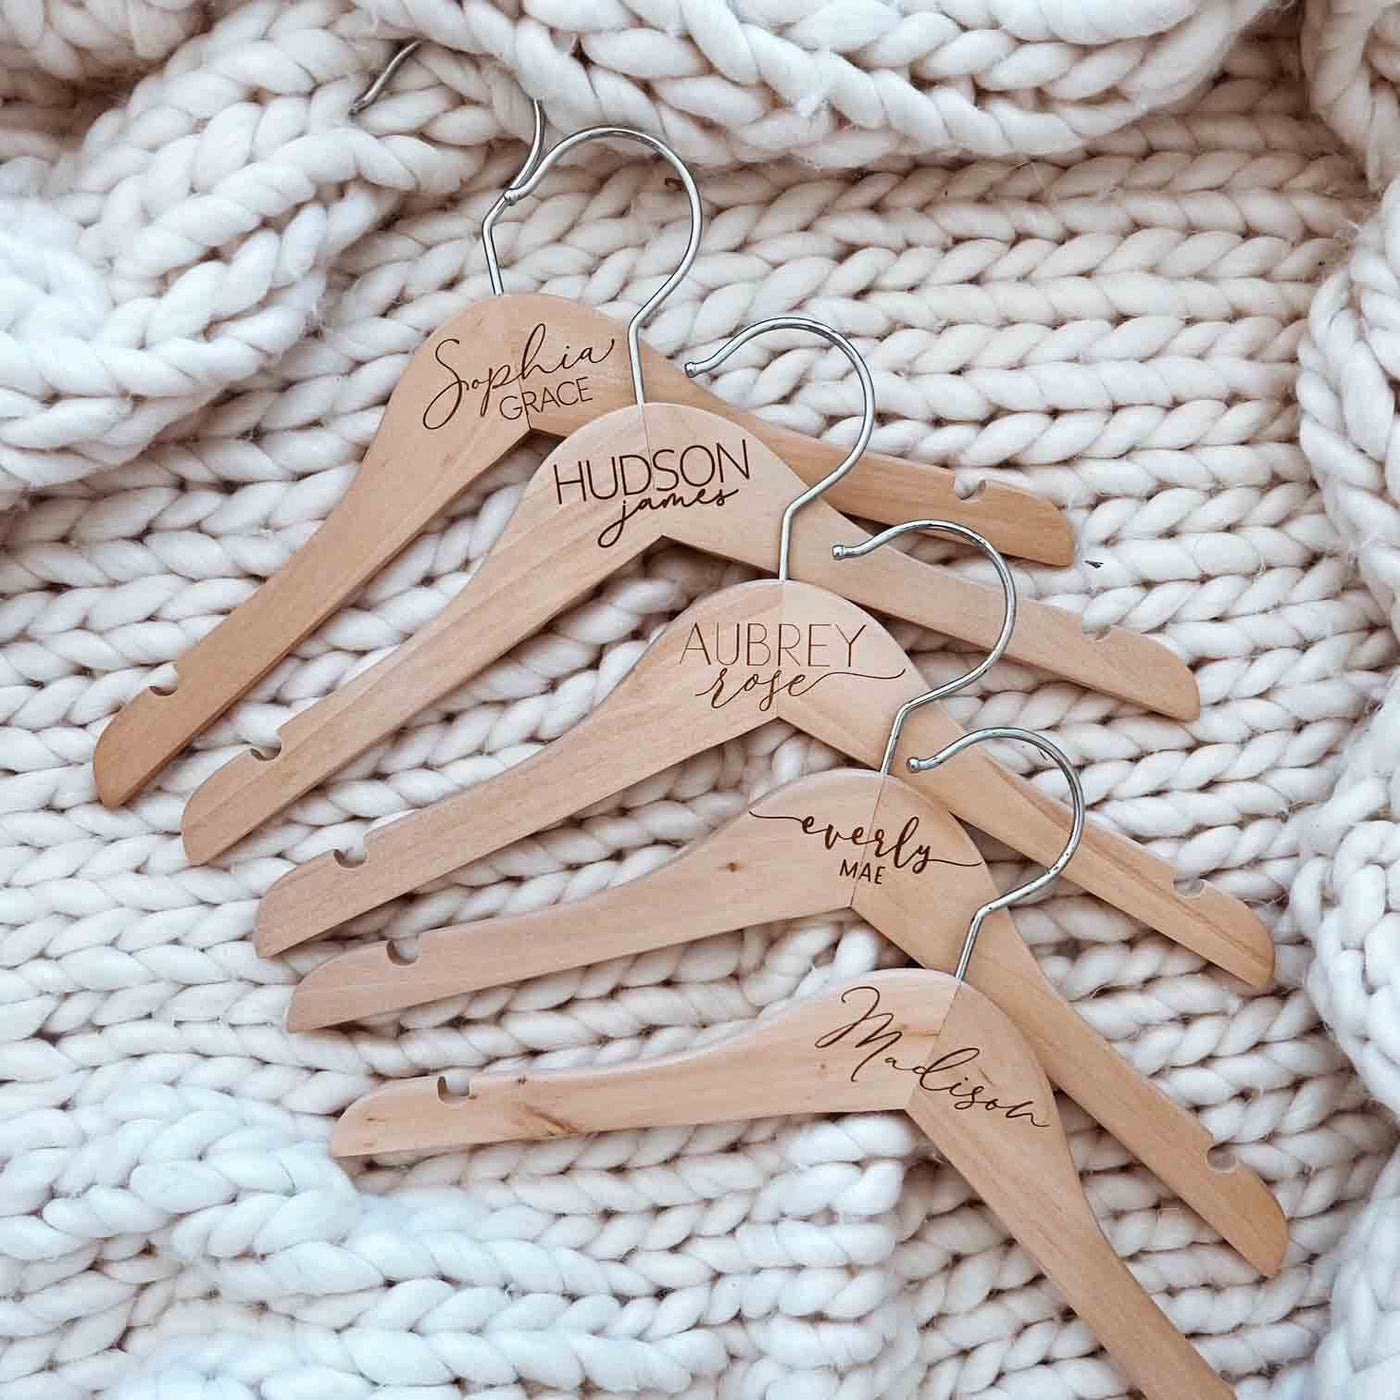 Child's Personalised Clothes Hangers pair, Baby Coat Hangers, Personalised  Baby Gift, New Baby Gift, Name and Colour of Choice, 